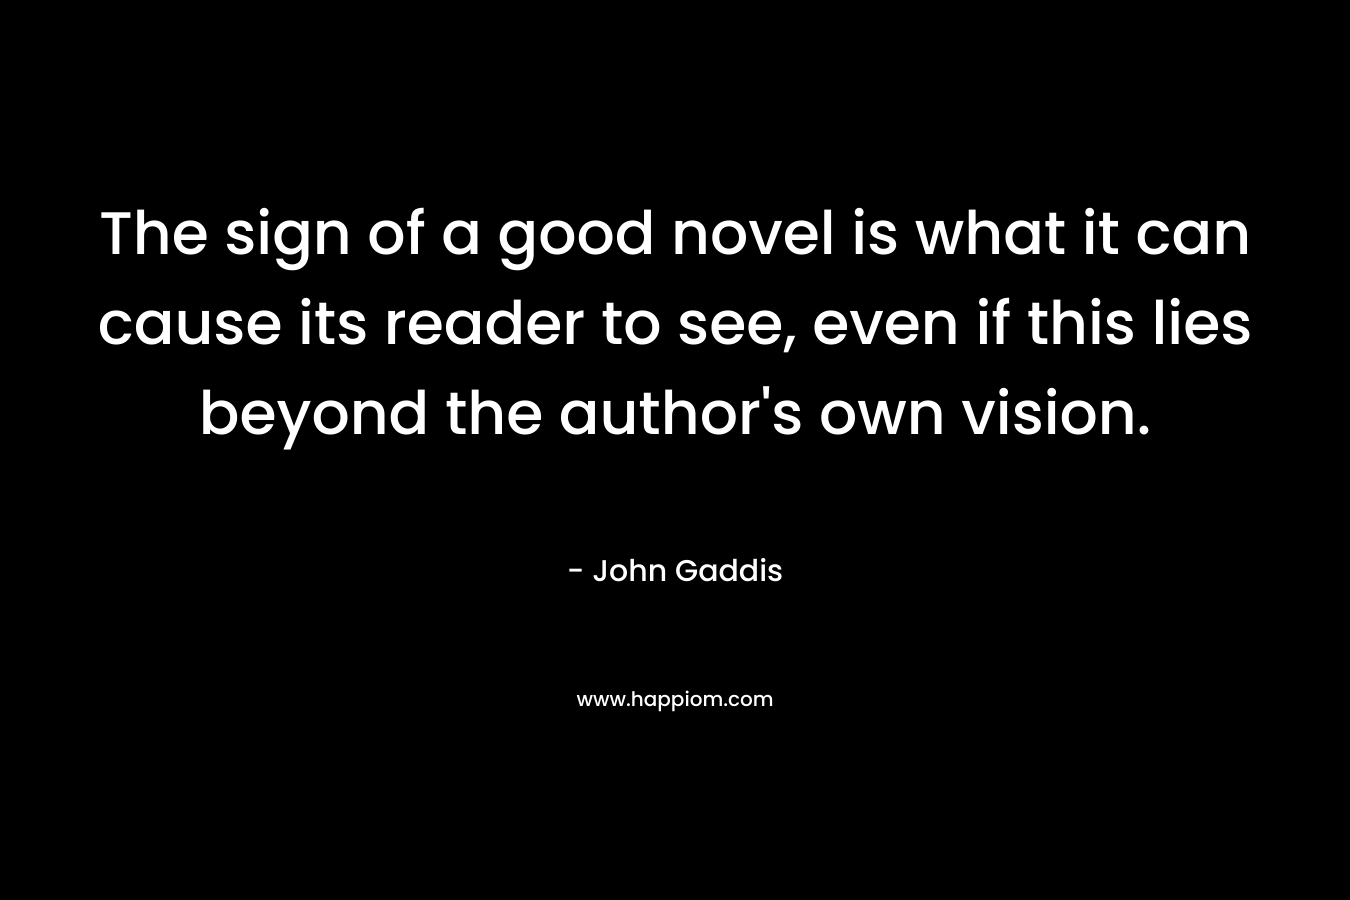 The sign of a good novel is what it can cause its reader to see, even if this lies beyond the author's own vision.